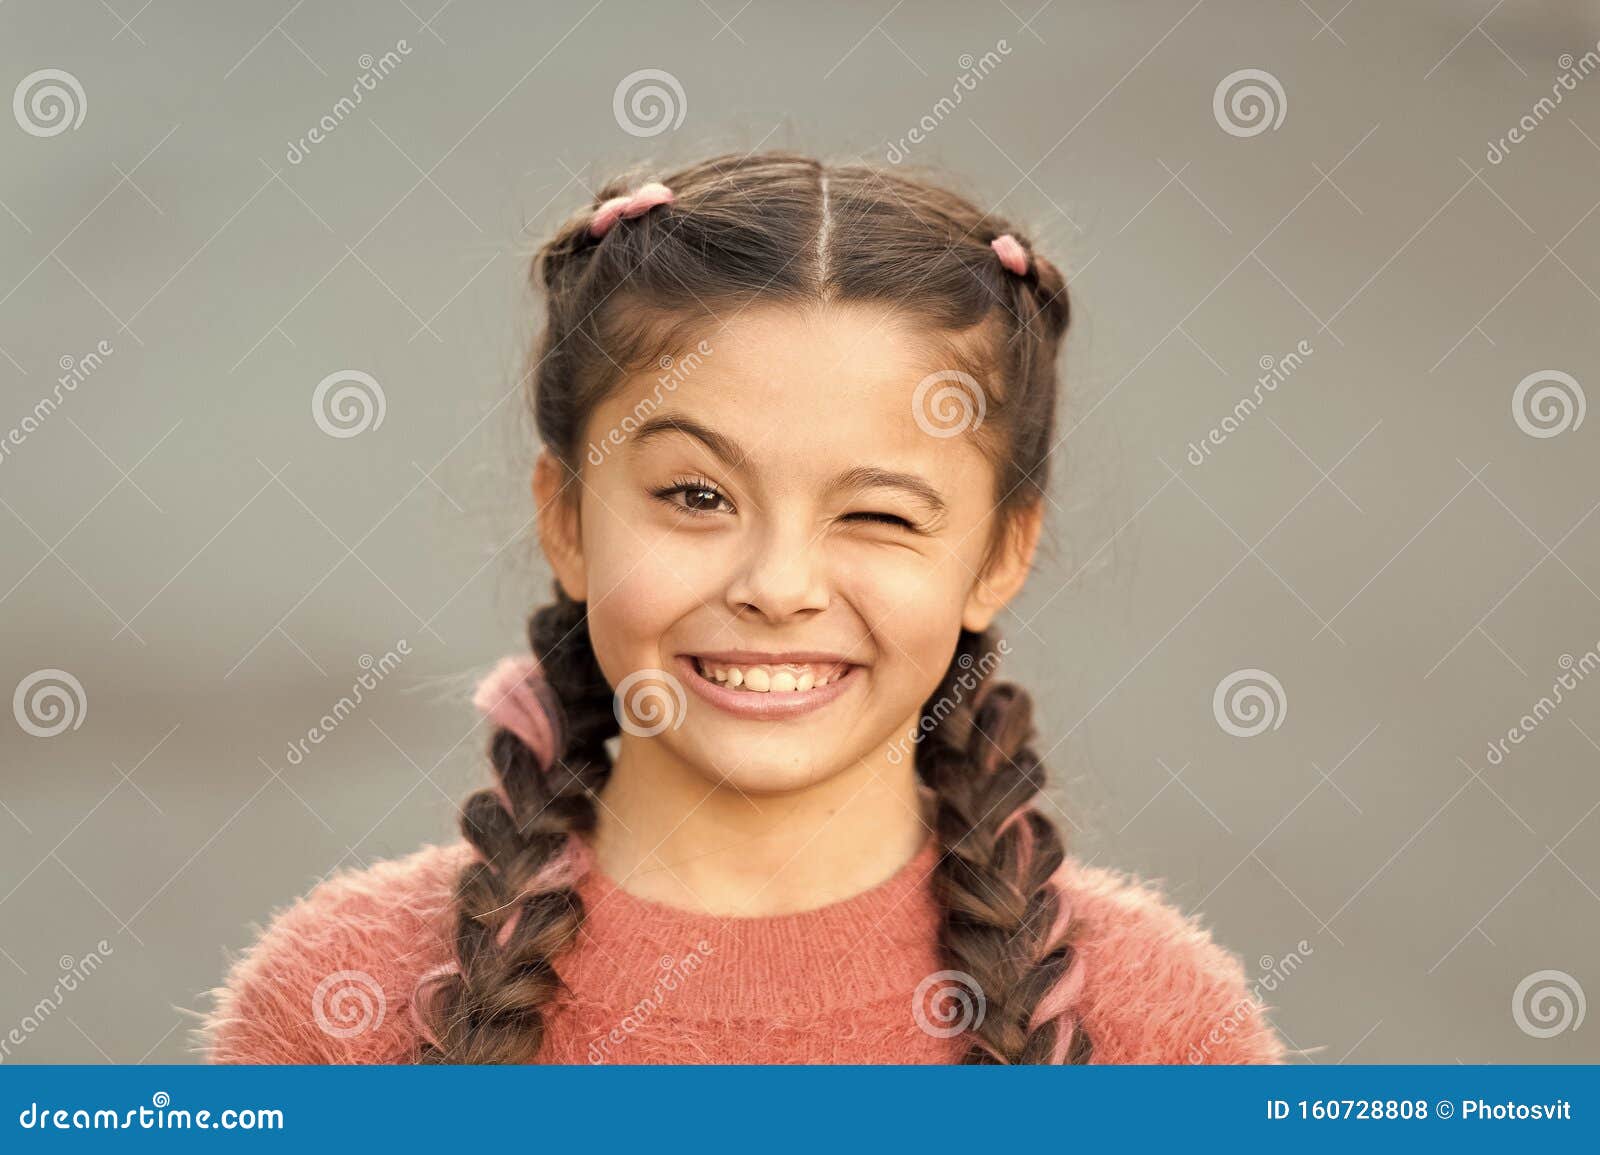 things gonna be alright. girl wink cheerful face grey background. kid girl cheerful satisfied with everything. cheerful